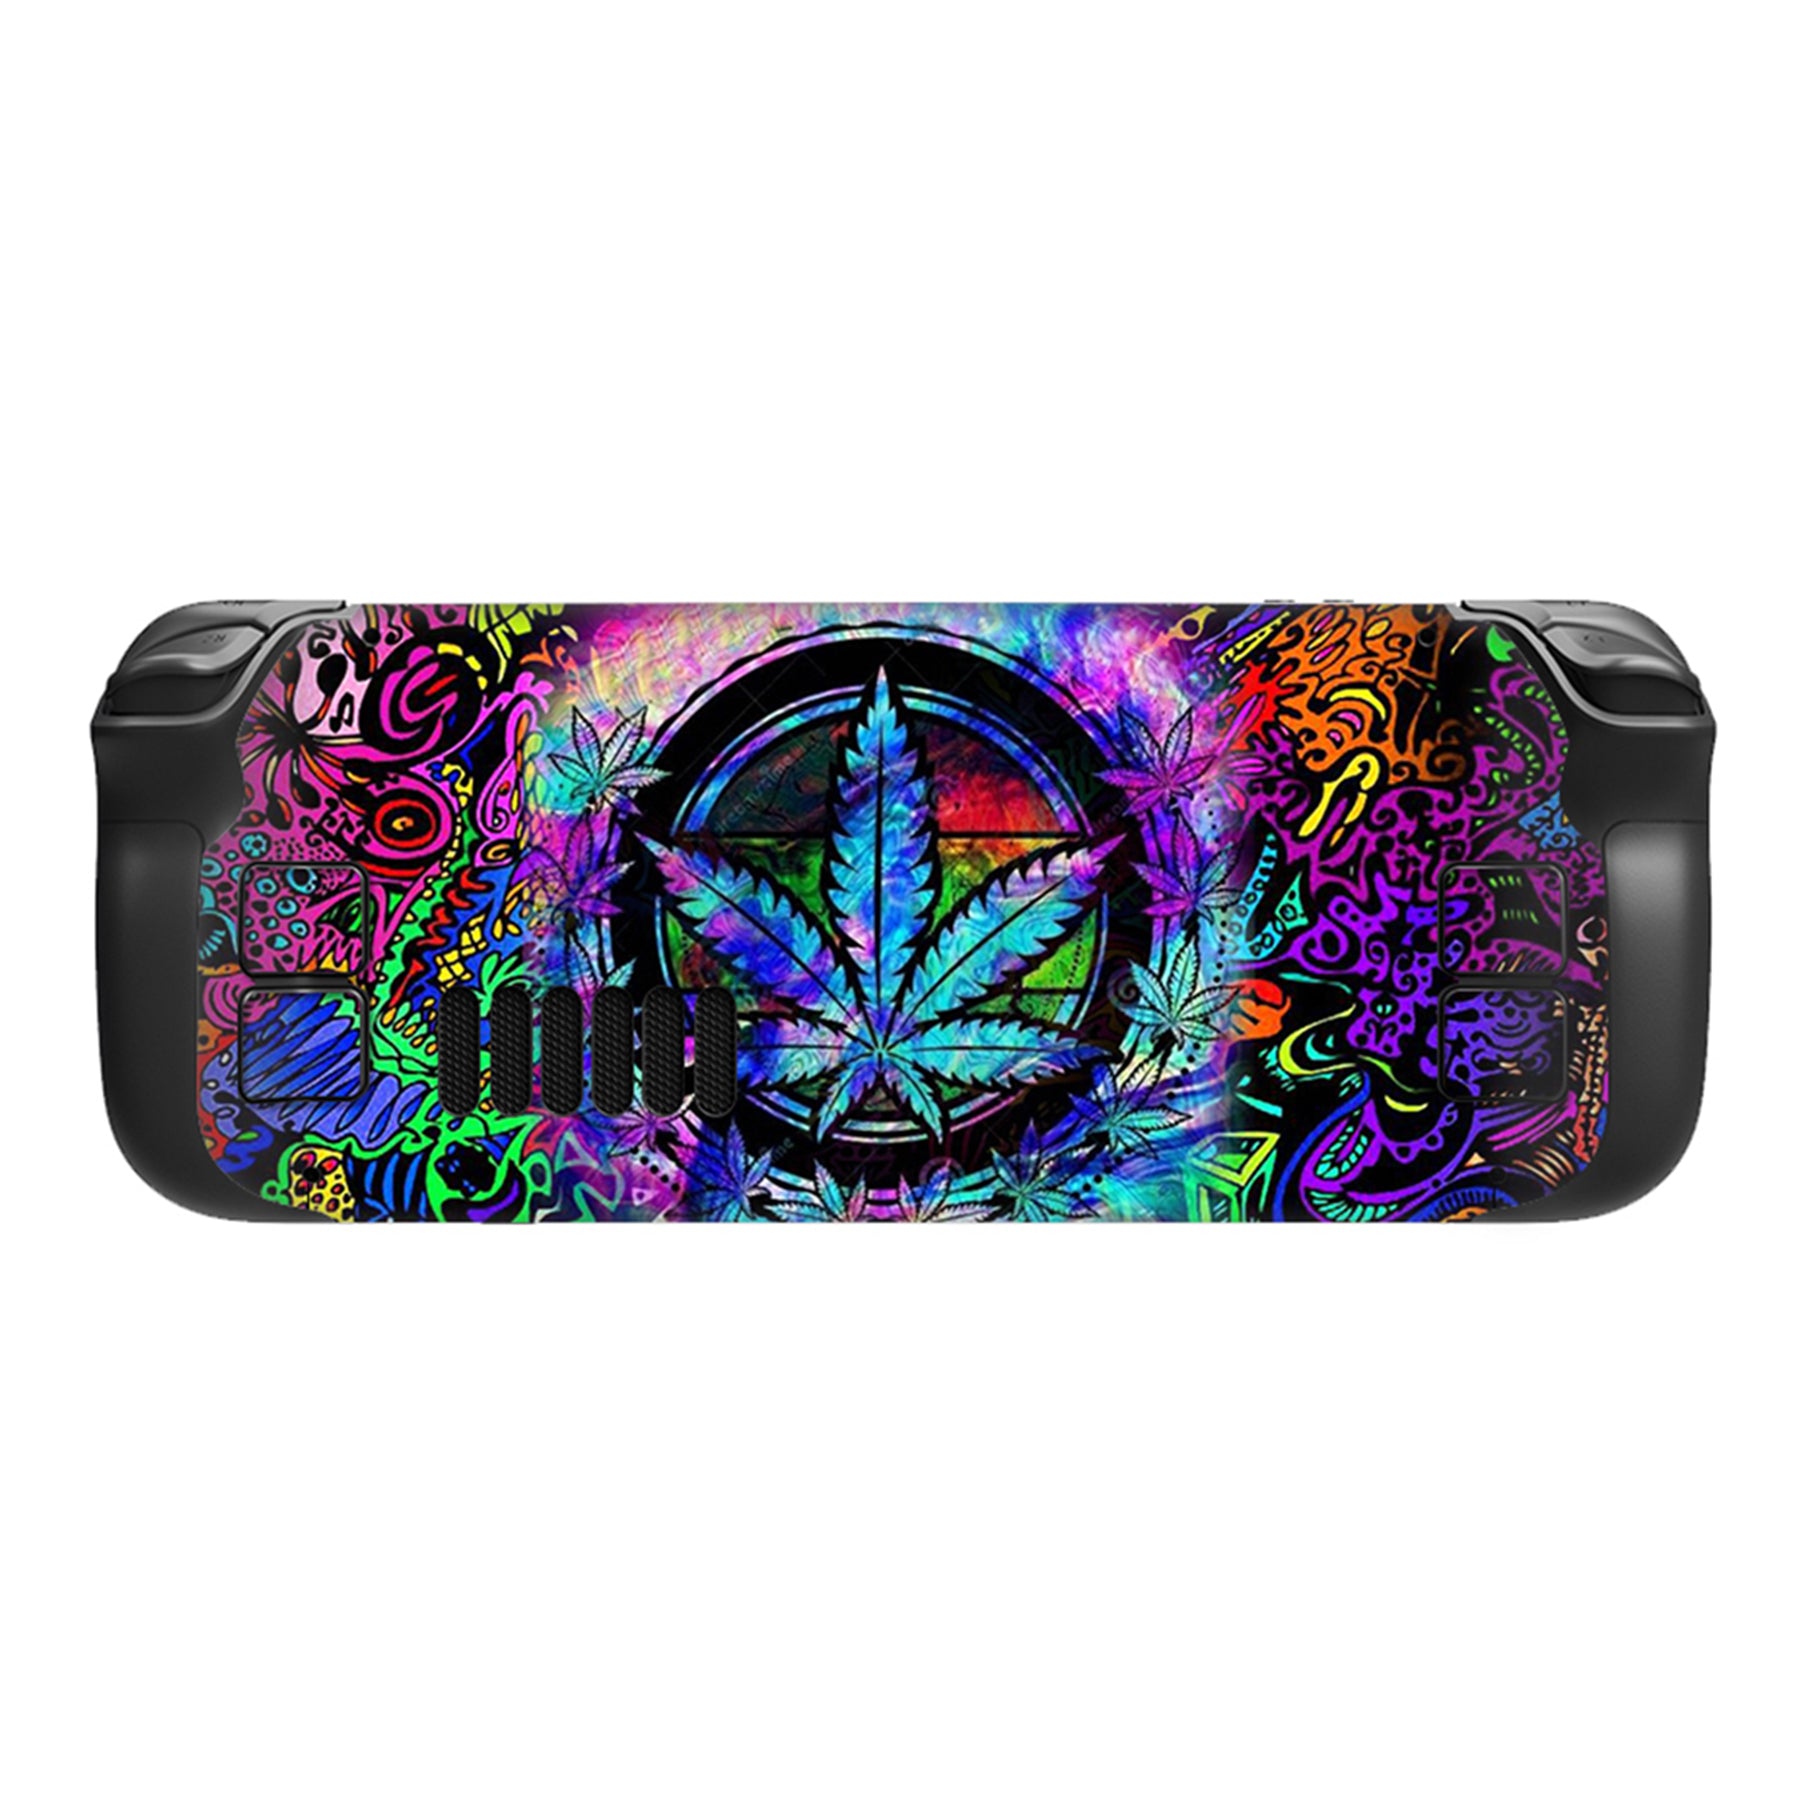 PlayVital Full Set Protective Skin Decal for Steam Deck, Custom Stickers Vinyl Cover for Steam Deck Handheld Gaming PC - Psychedelic Leaf - SDTM007 playvital